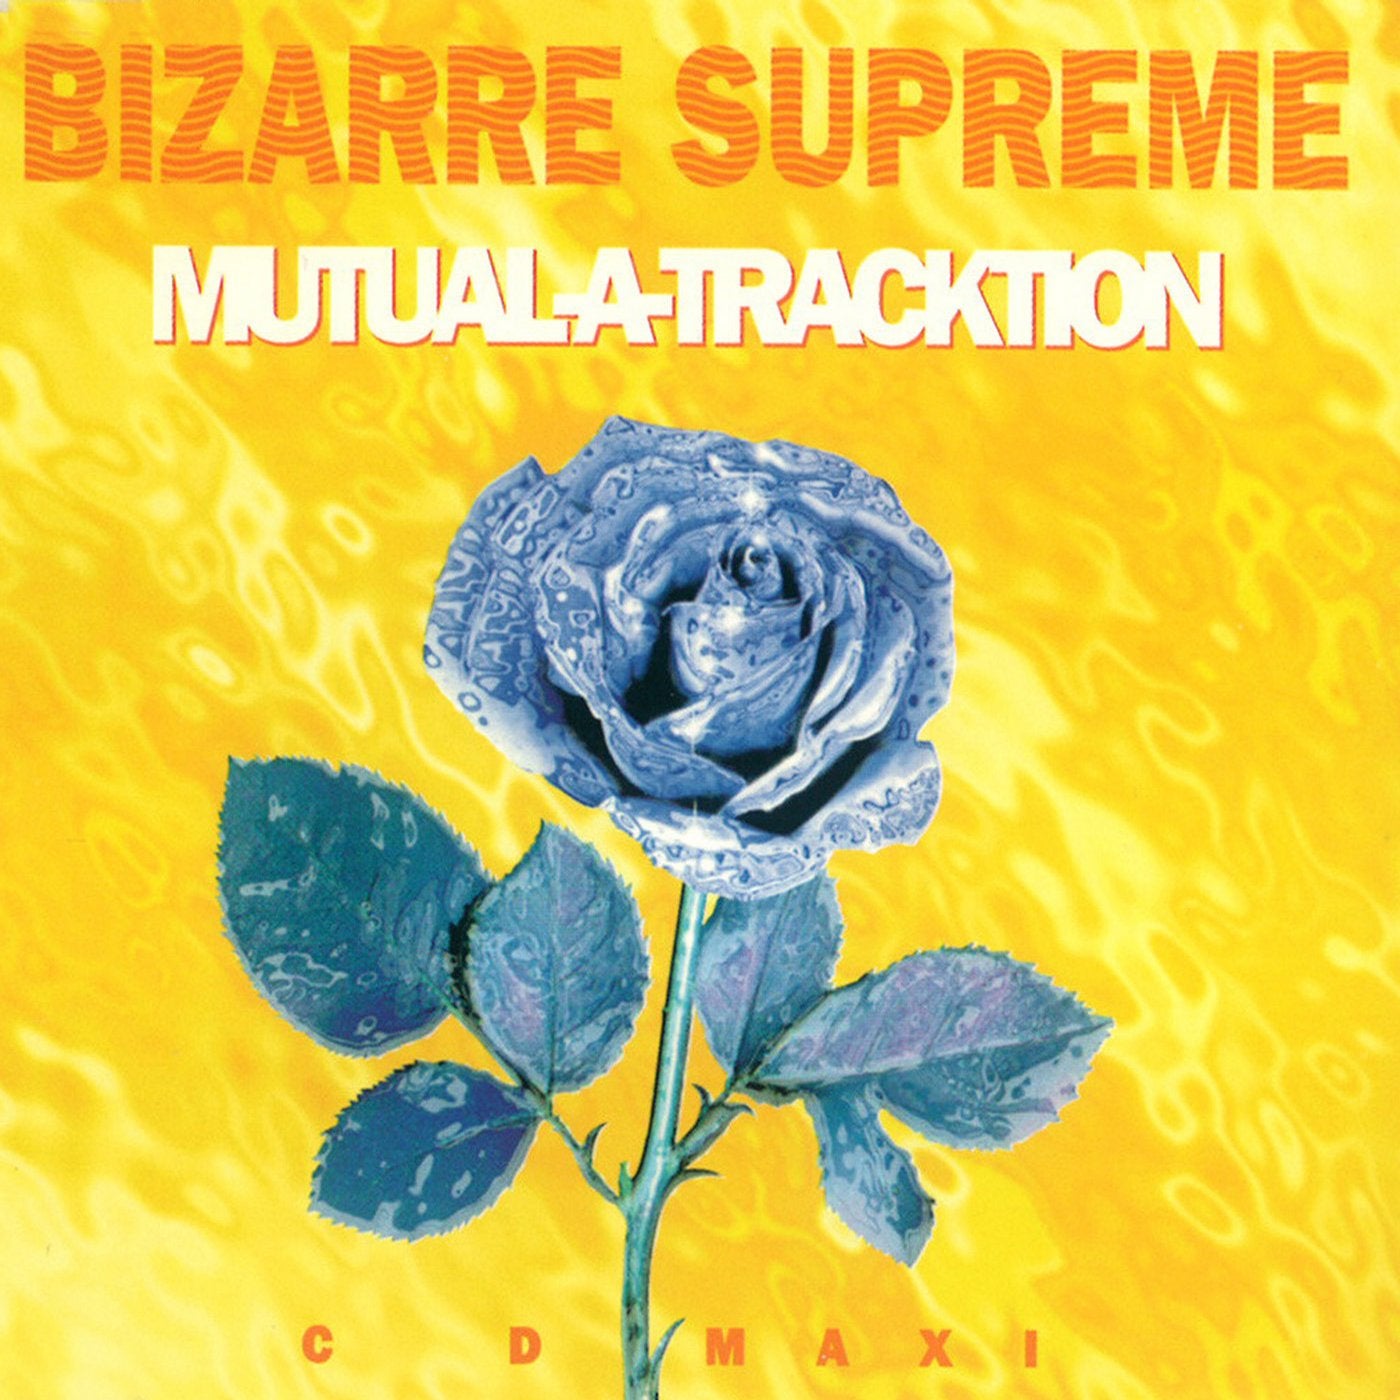 Mutual-A-Tracktion